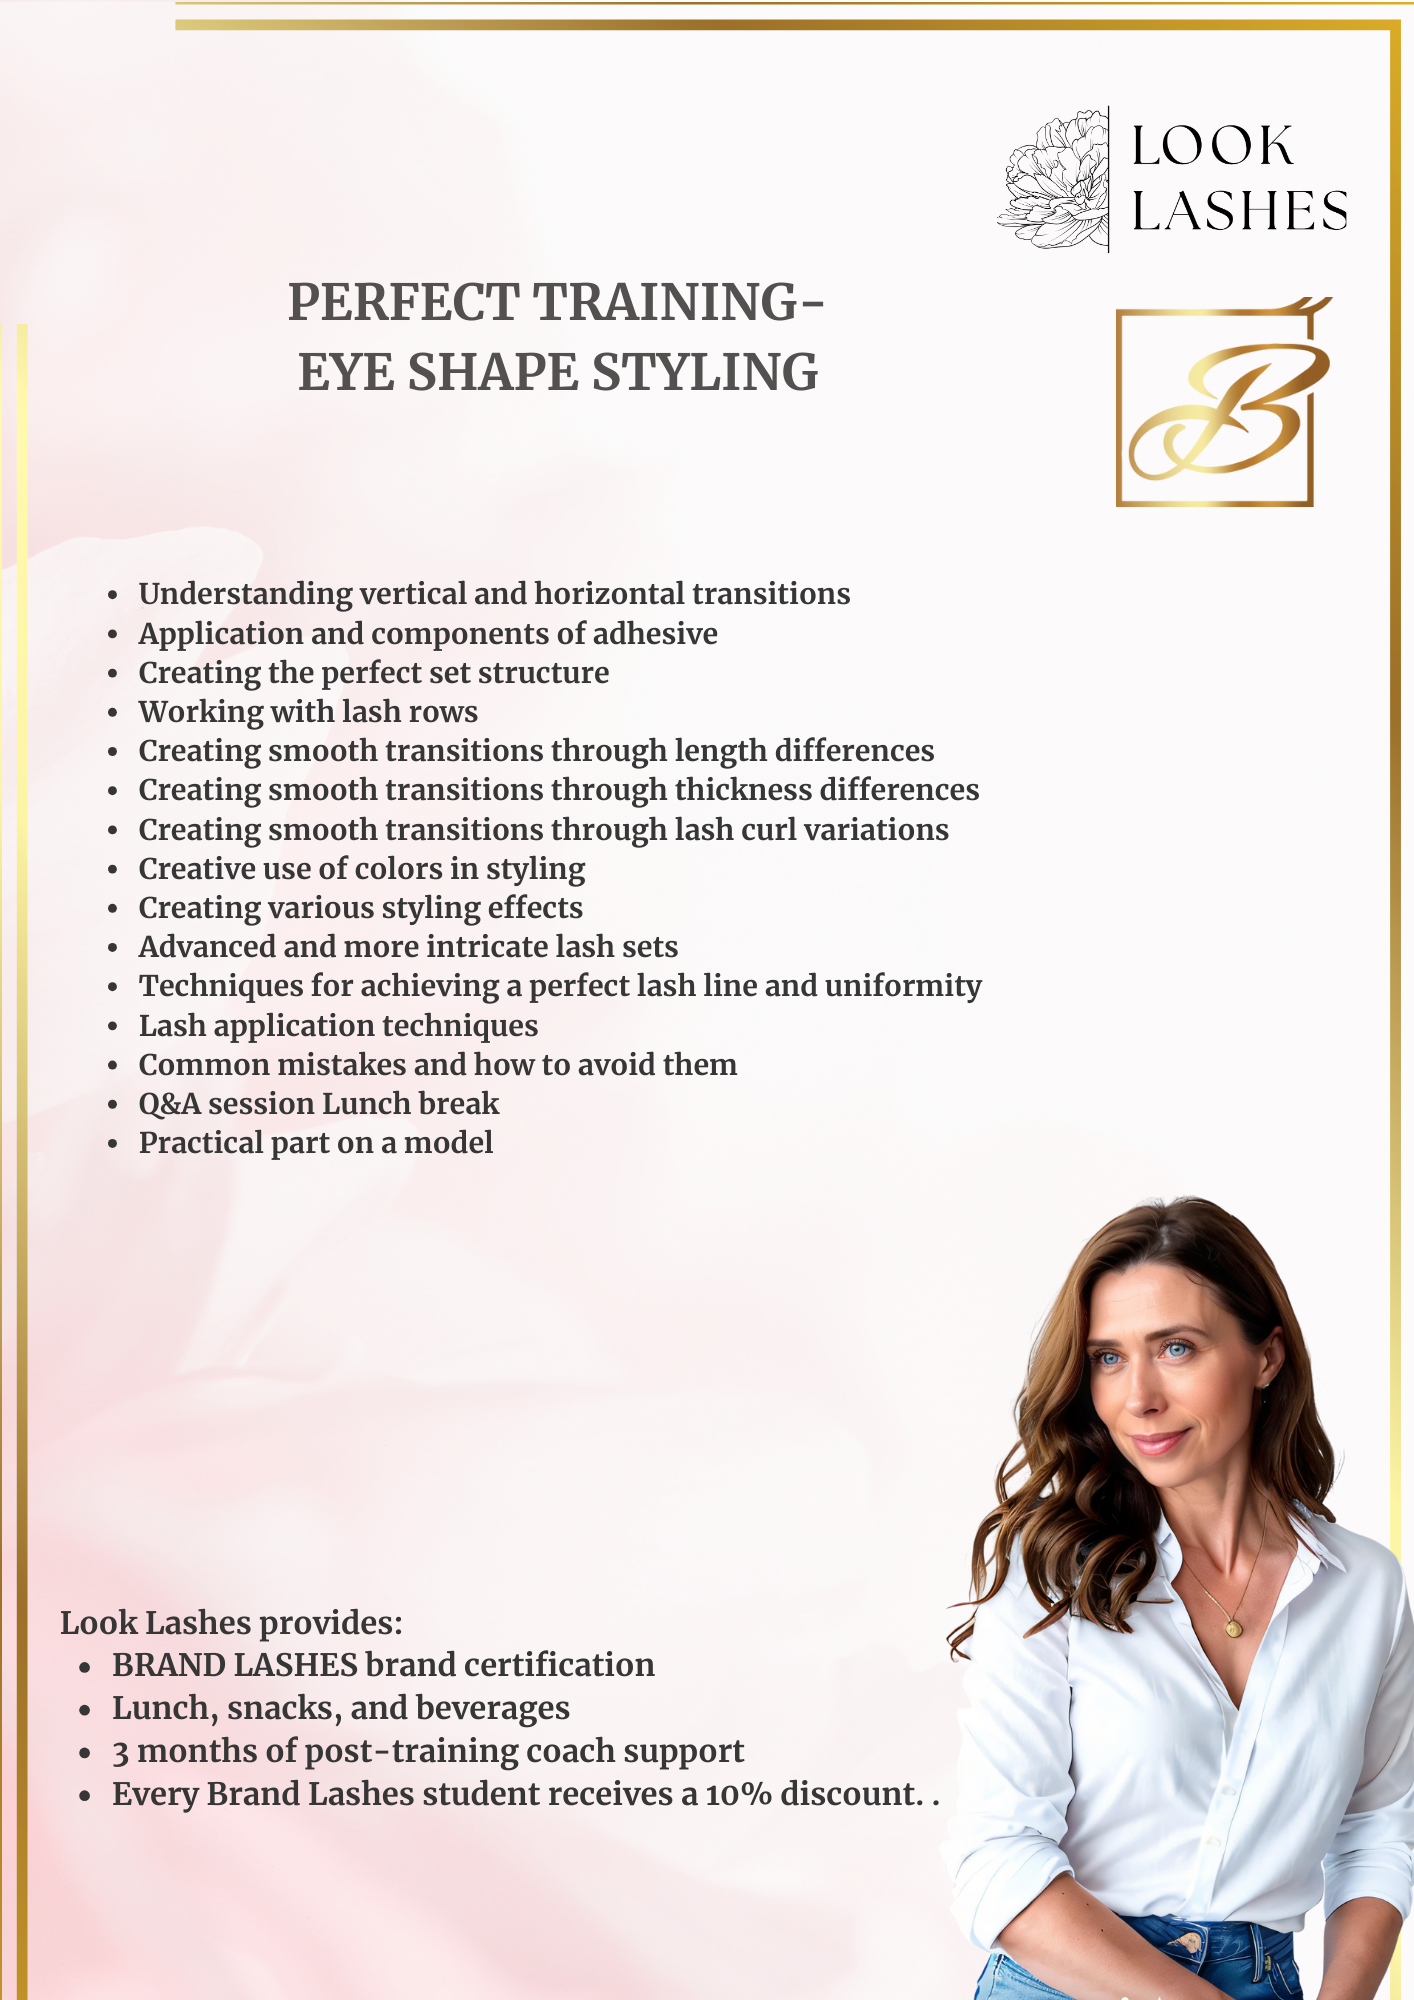 PERFECT TRAINING-EYE SHAPE STYLING AND LAYERING TECHNIQUE TRAINING